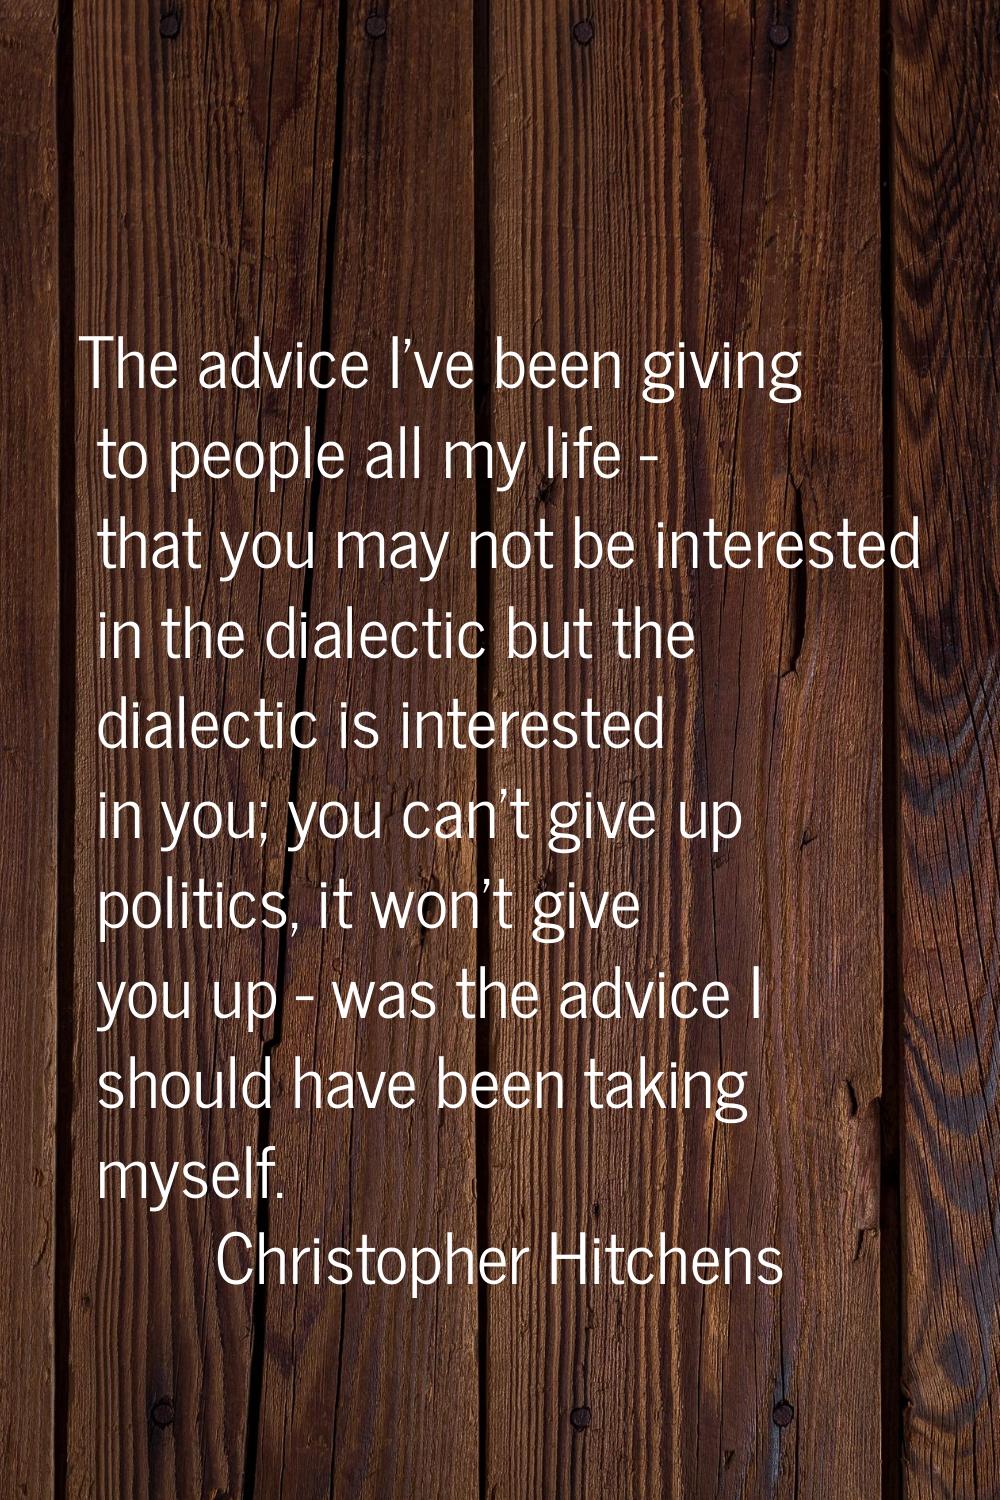 The advice I've been giving to people all my life - that you may not be interested in the dialectic